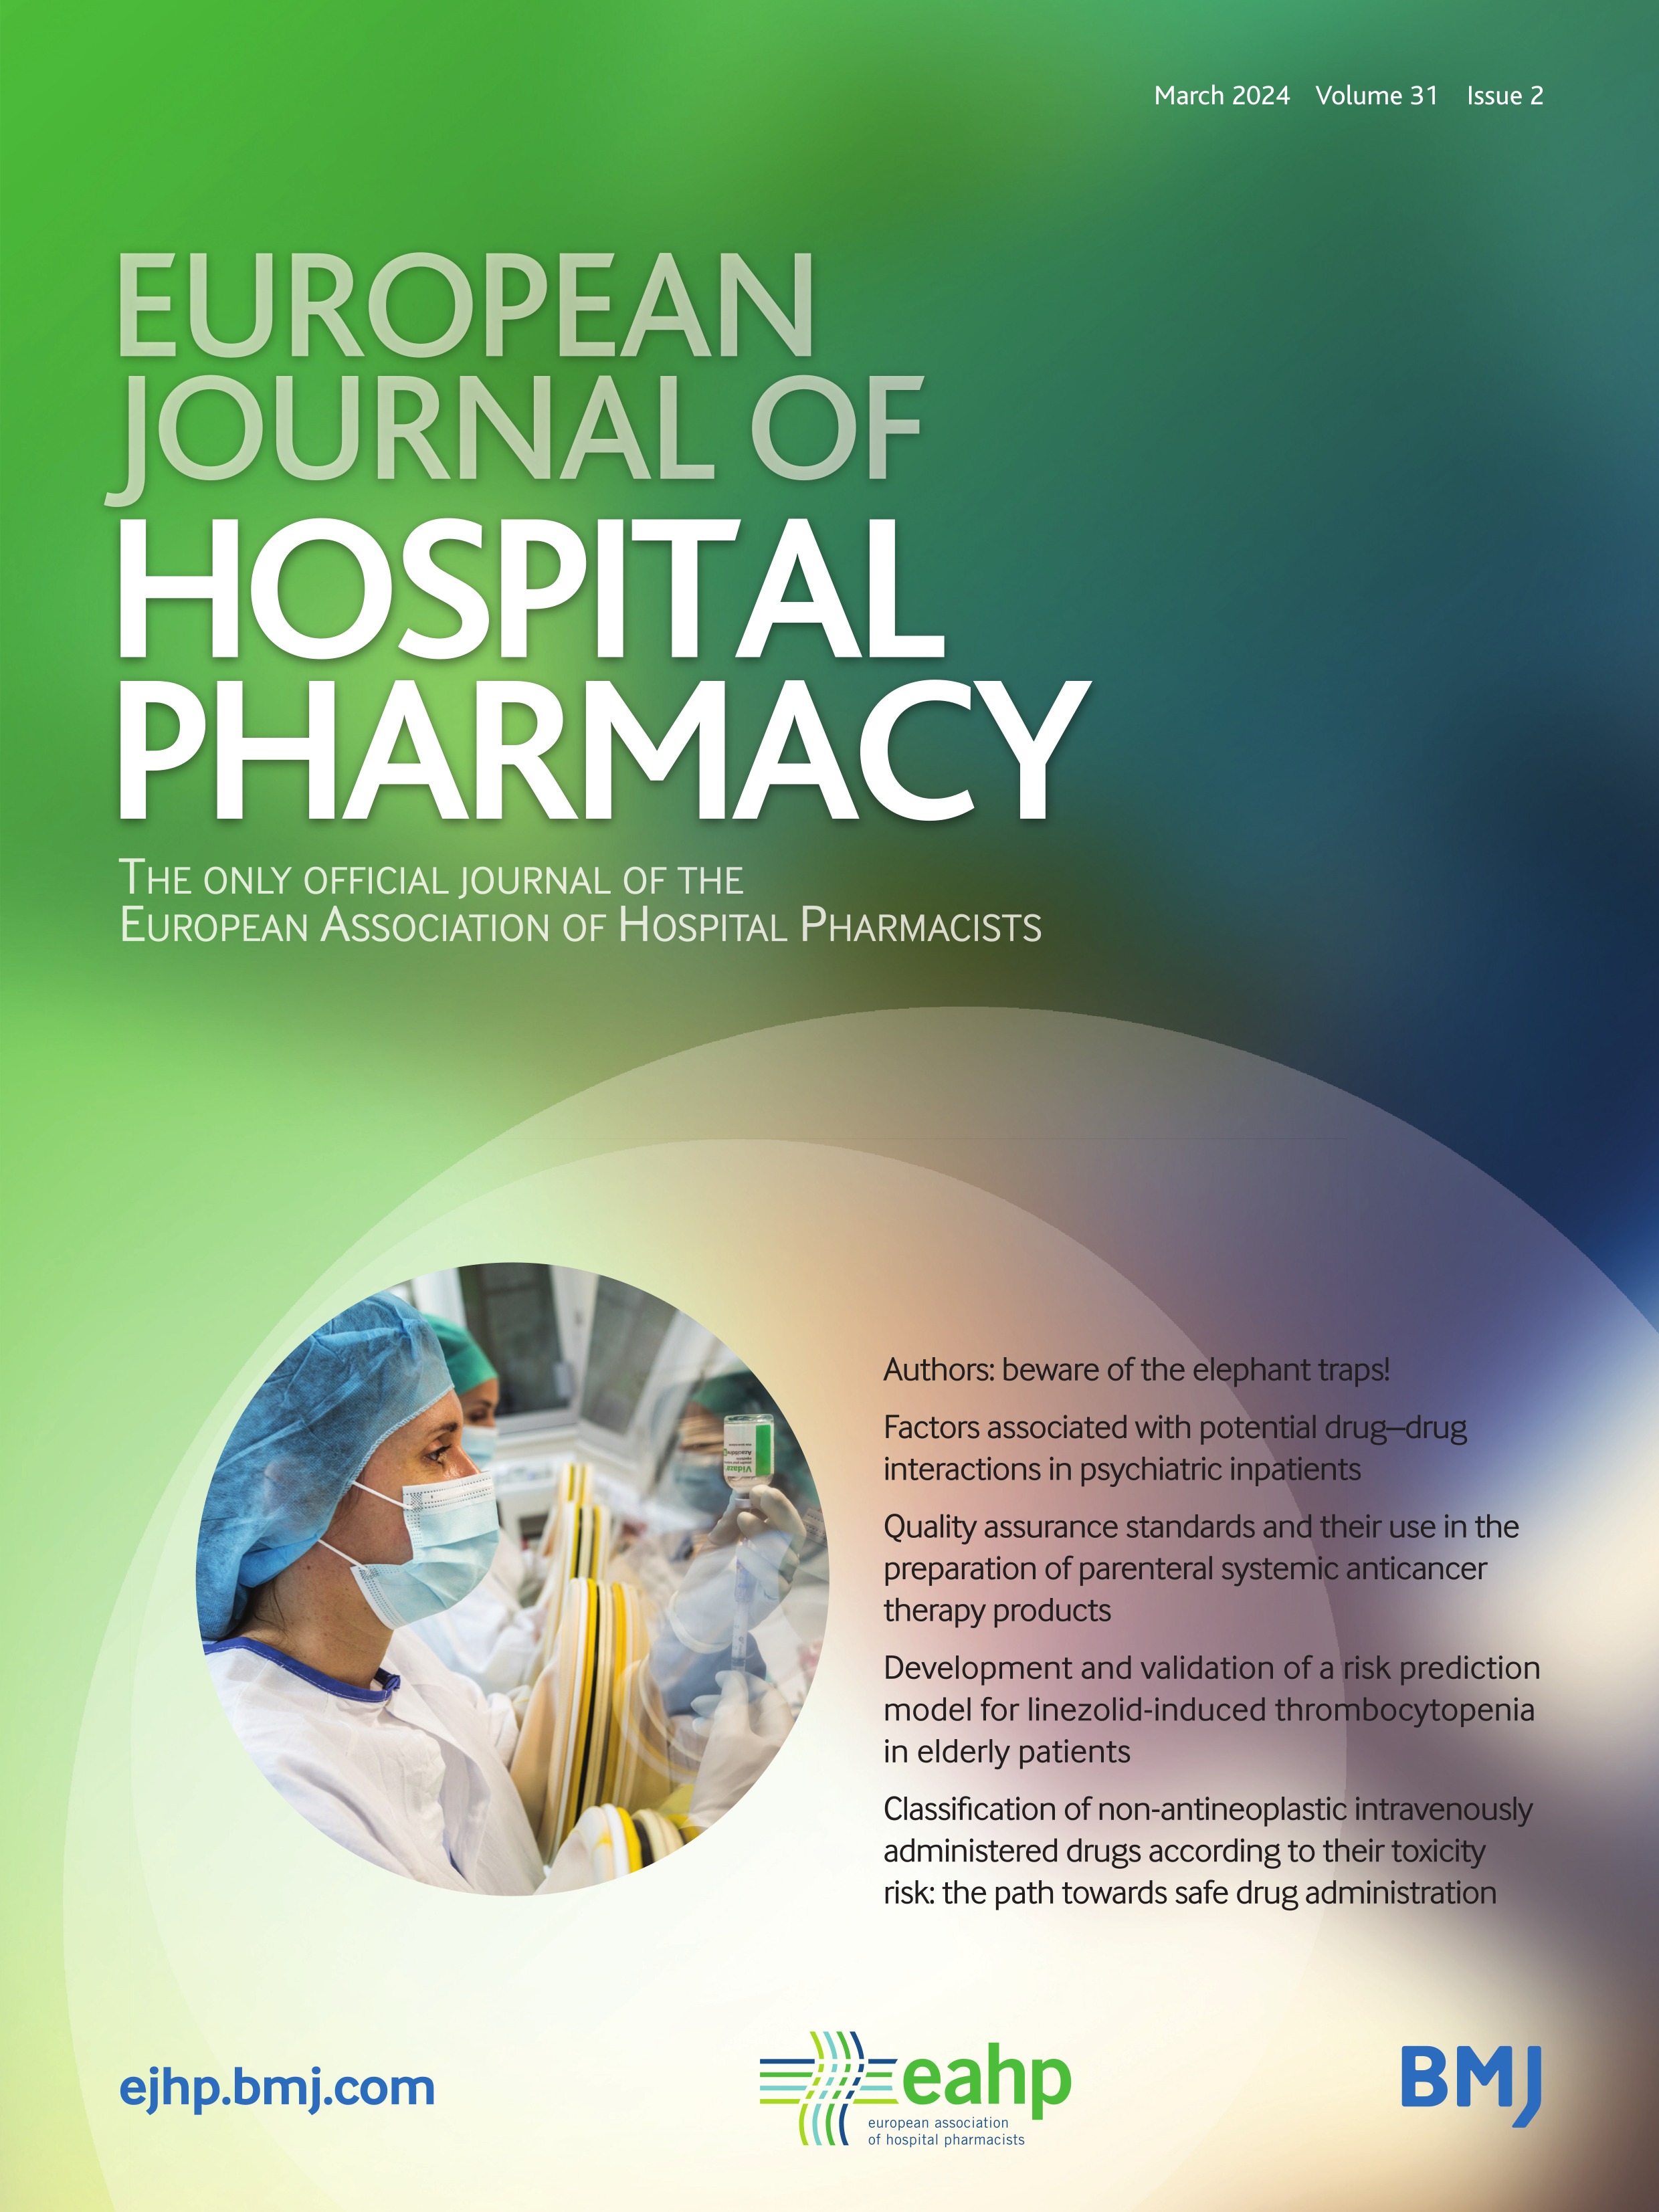 Quality assurance standards and their use in the preparation of parenteral systemic anticancer therapy products in healthcare establishments: a scoping review